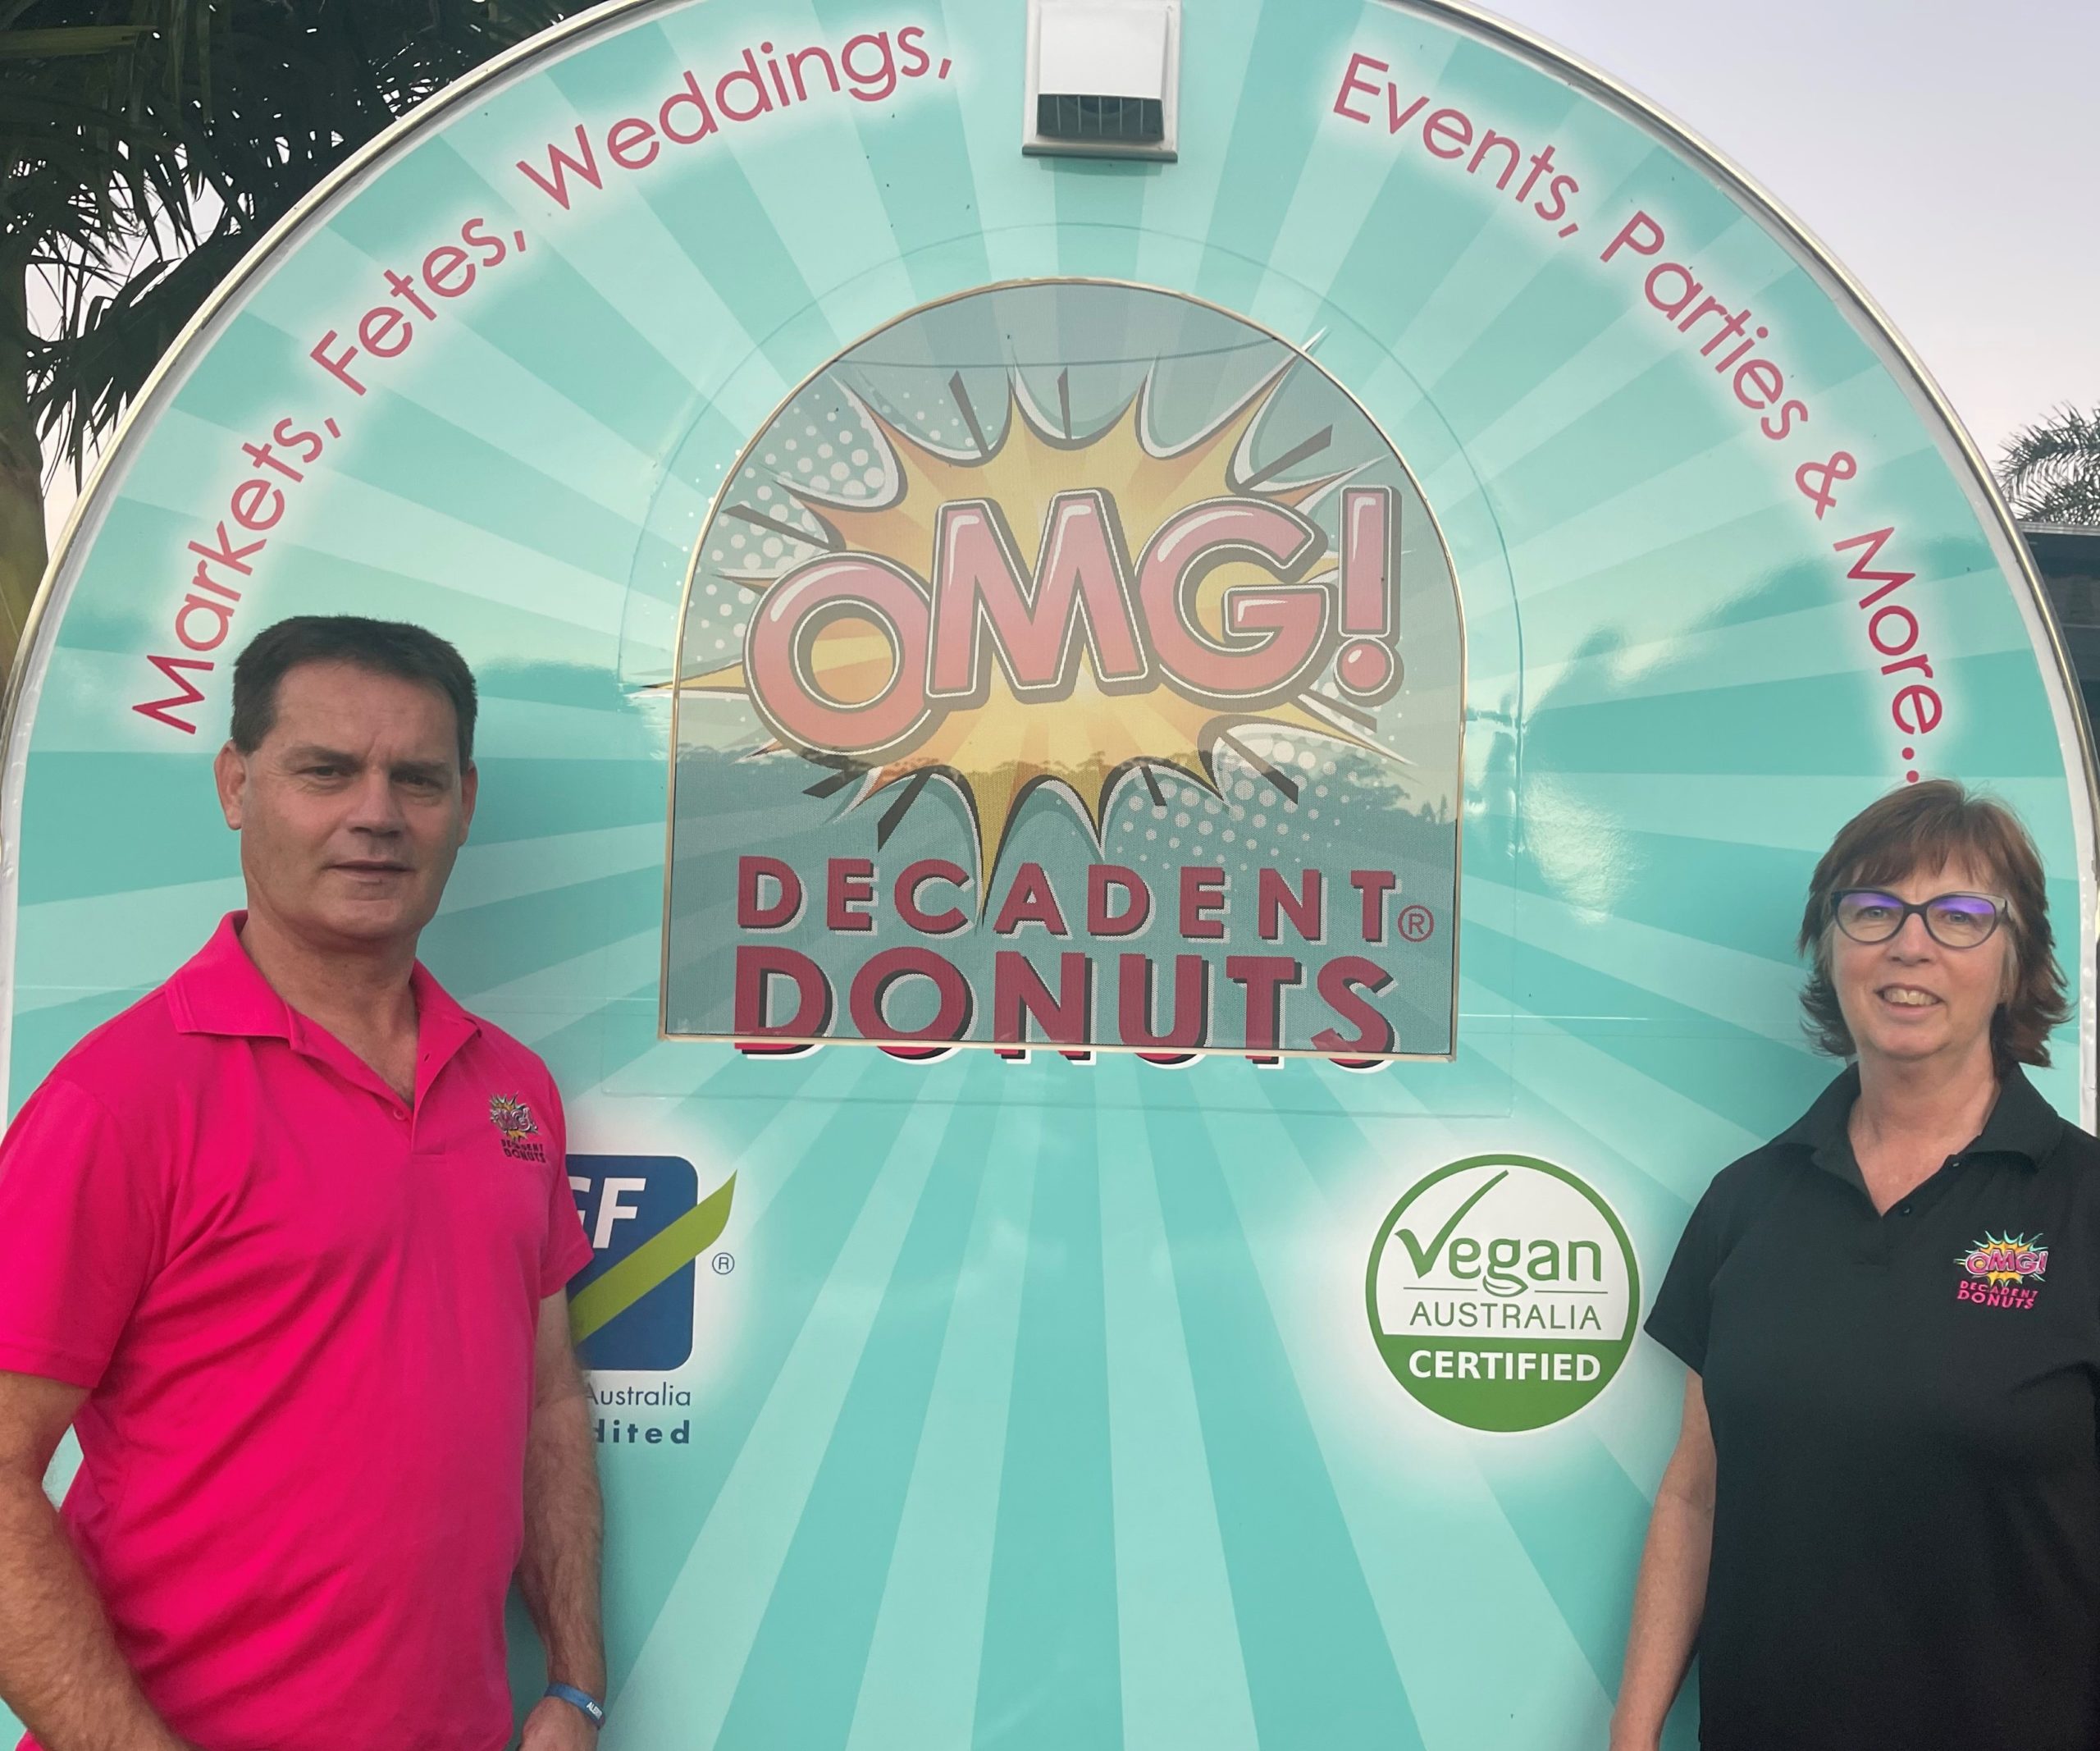 Hot Fresh Donuts that are Gluten free and Vegan